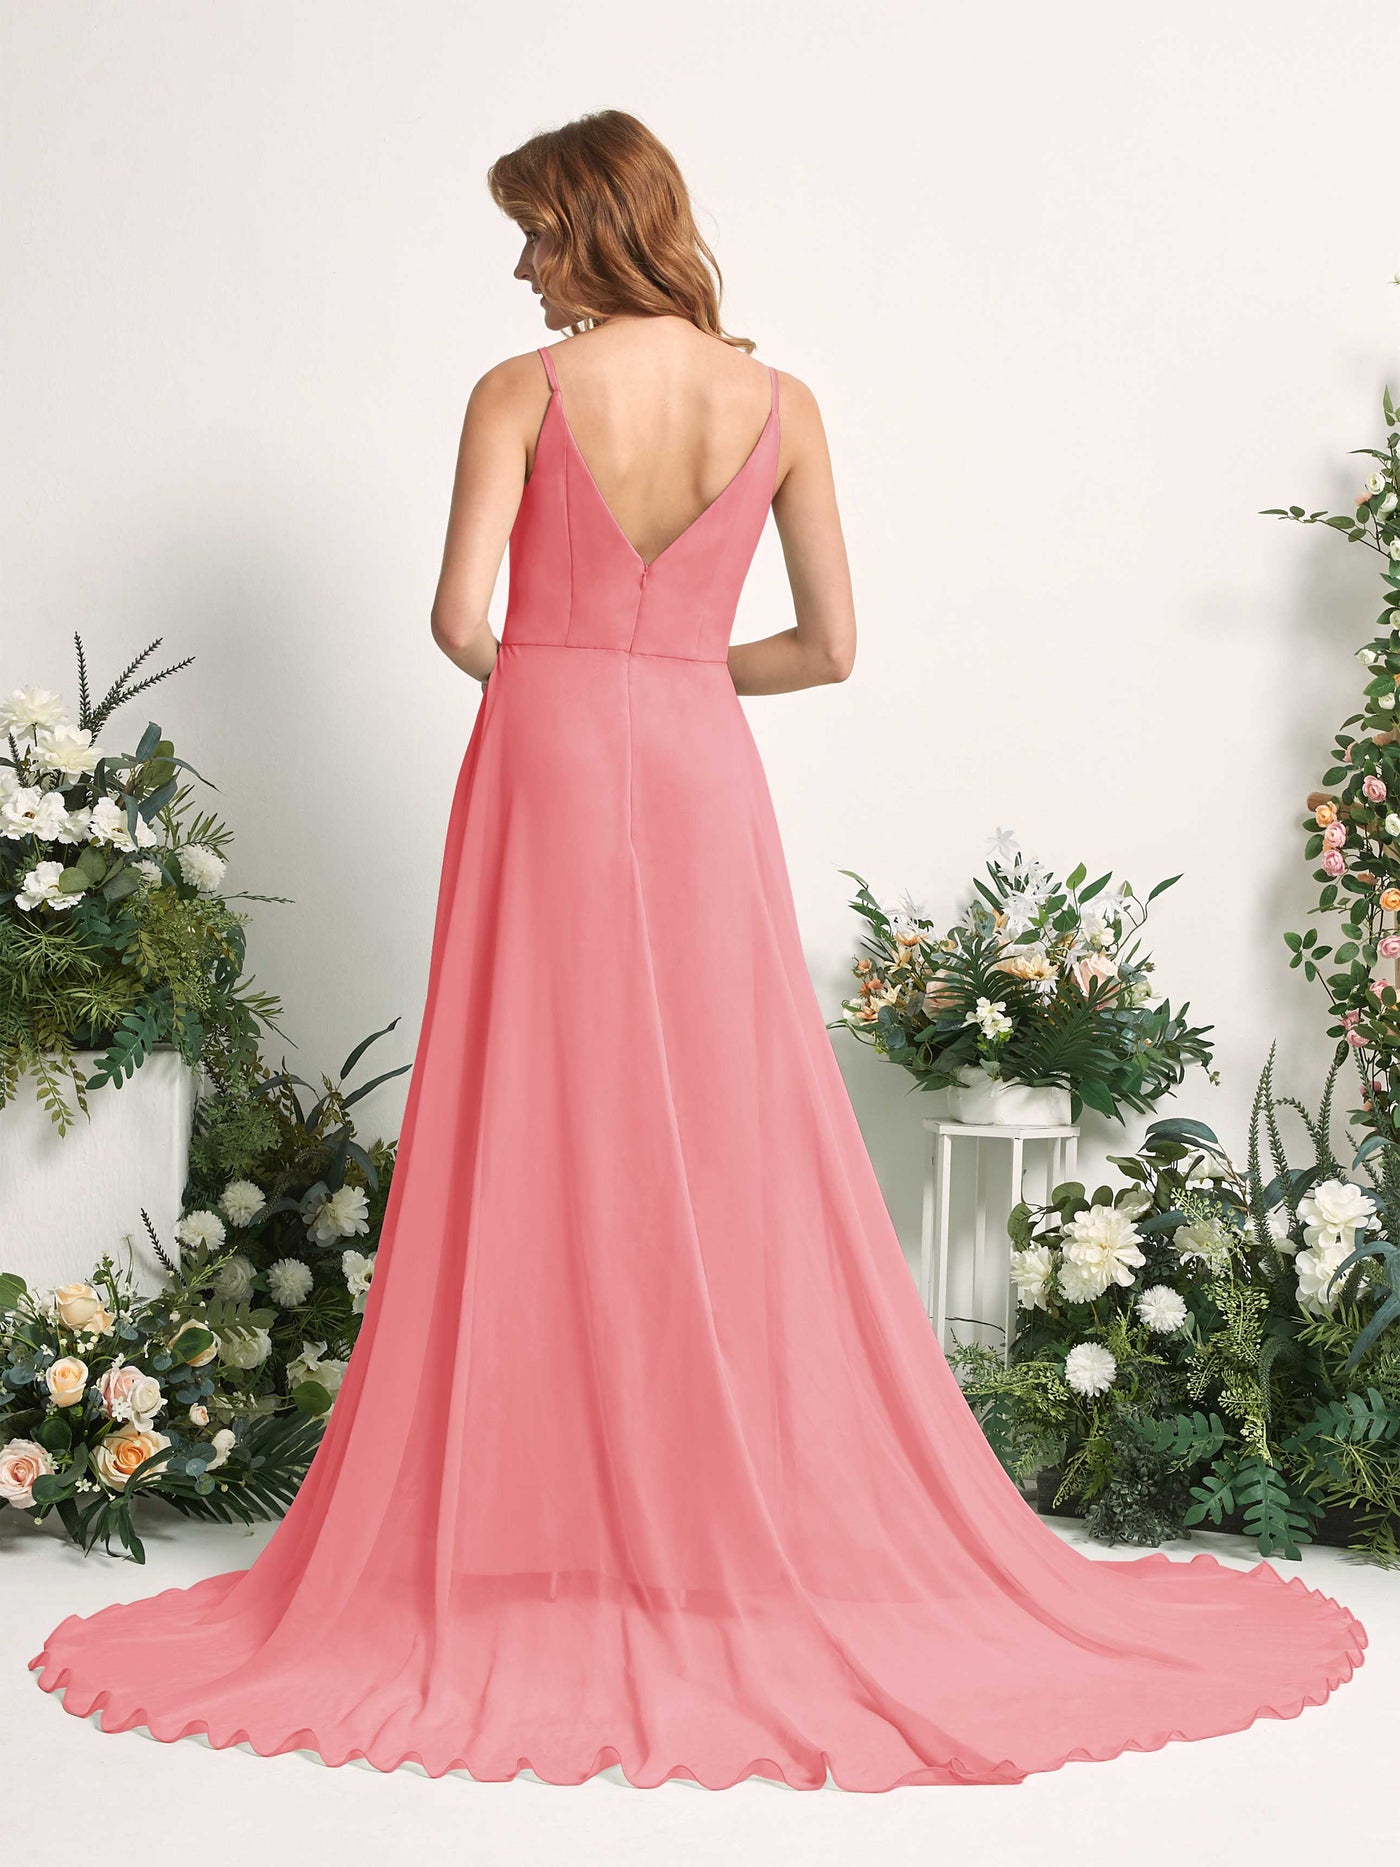 Bridesmaid Dress A-line Chiffon Spaghetti-straps Full Length Sleeveless Wedding Party Dress - Coral Pink (81227730)#color_coral-pink